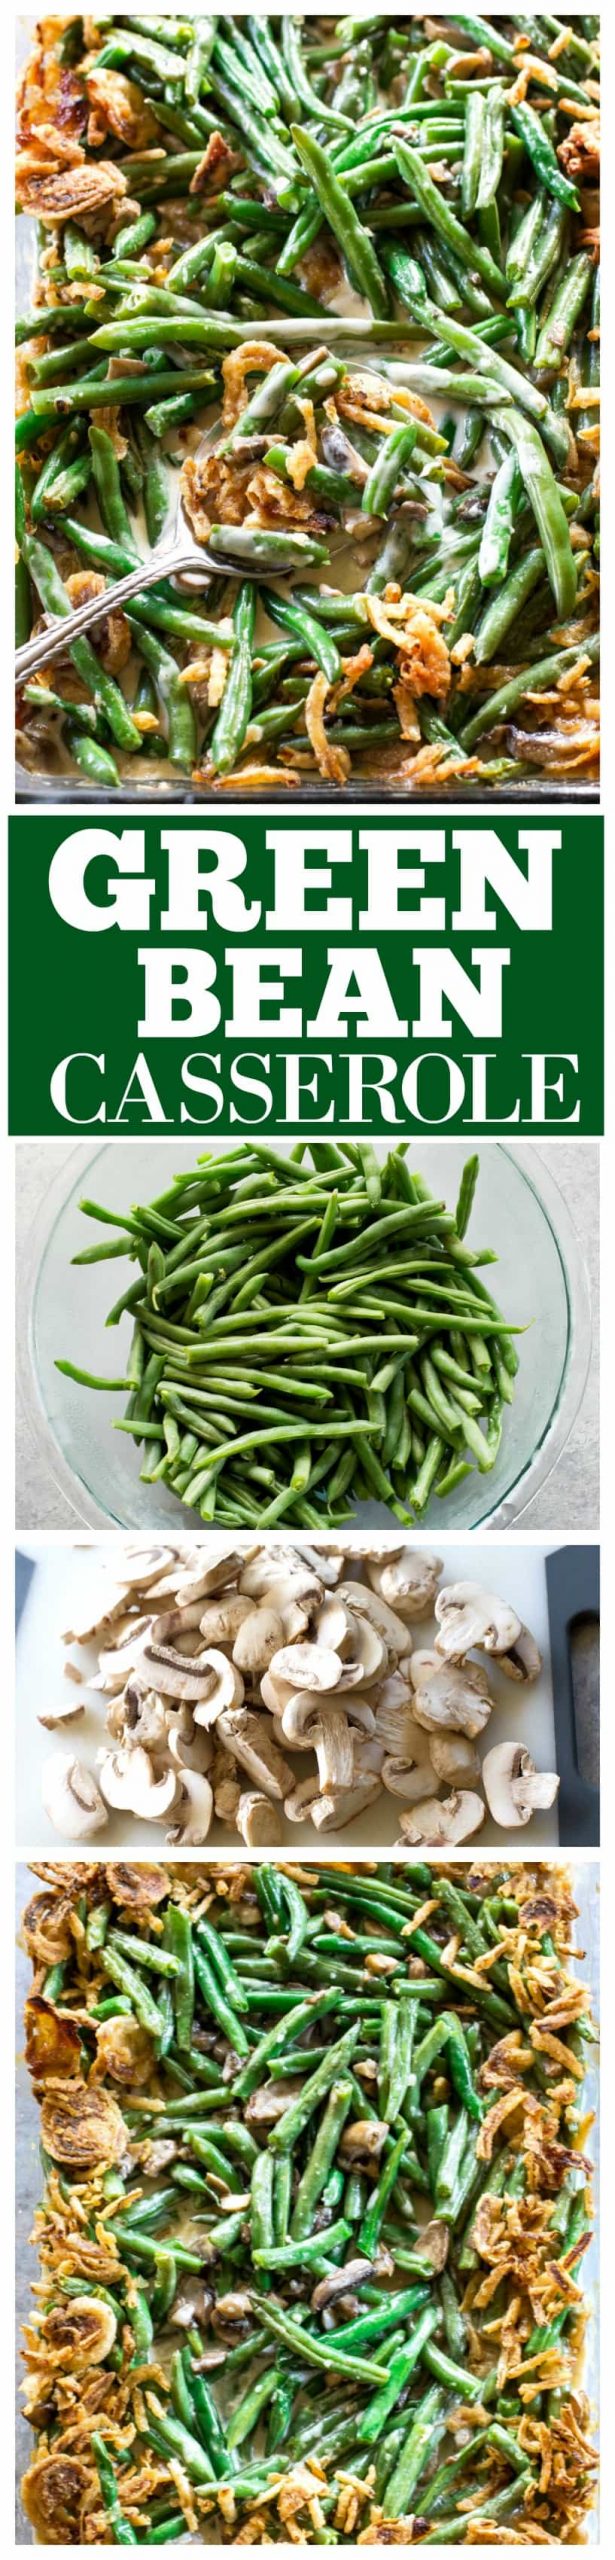 fb image scaled - Green Bean Casserole